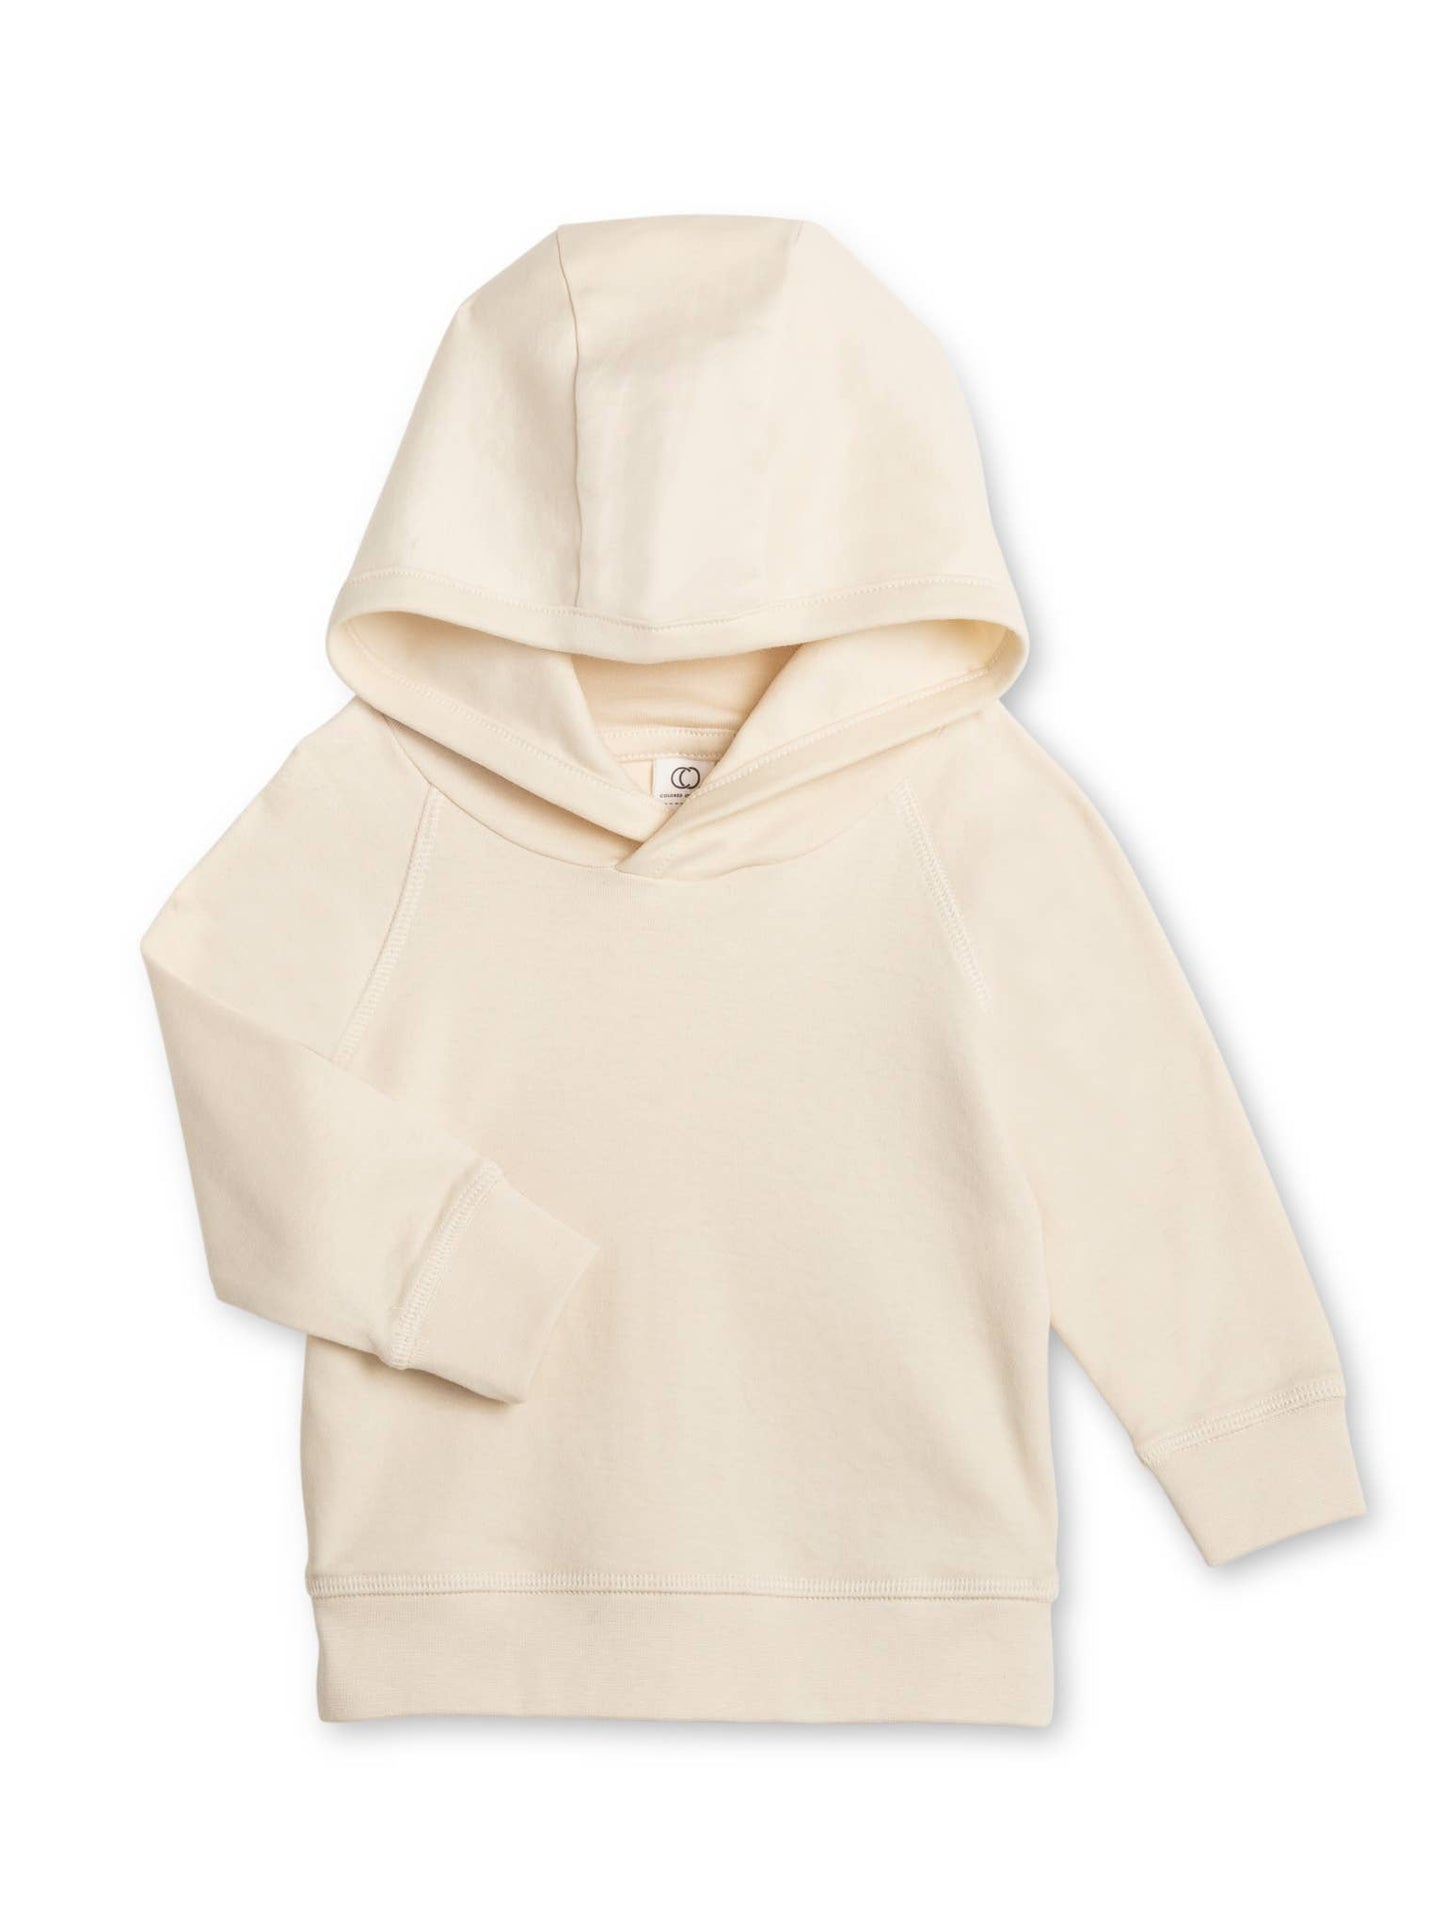 Colored Organics - Organic Baby and Kids Madison Hooded Pullover - Natural